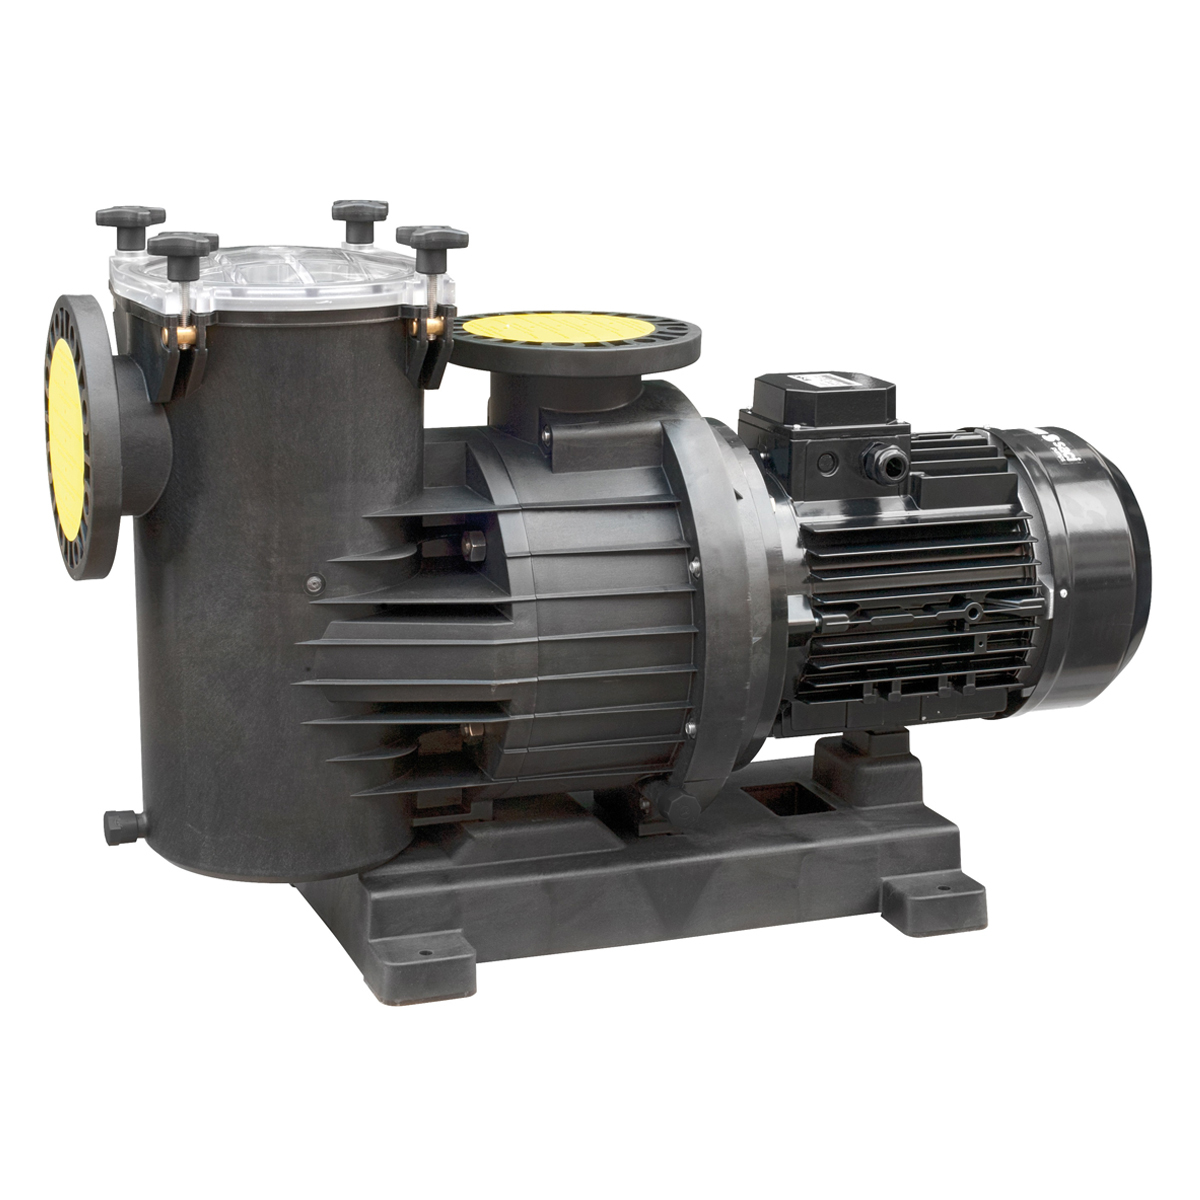 Smart Power Filter Pump 1250 400-690V, 2850 rpm 9,2 kW, 12,5 HP, 150 m³/h at 10m Smart Power Filter Pump 1250 400-690V, 2850 rpm 9,2 kW, 12,5 HP, 150 m³/h at 10m